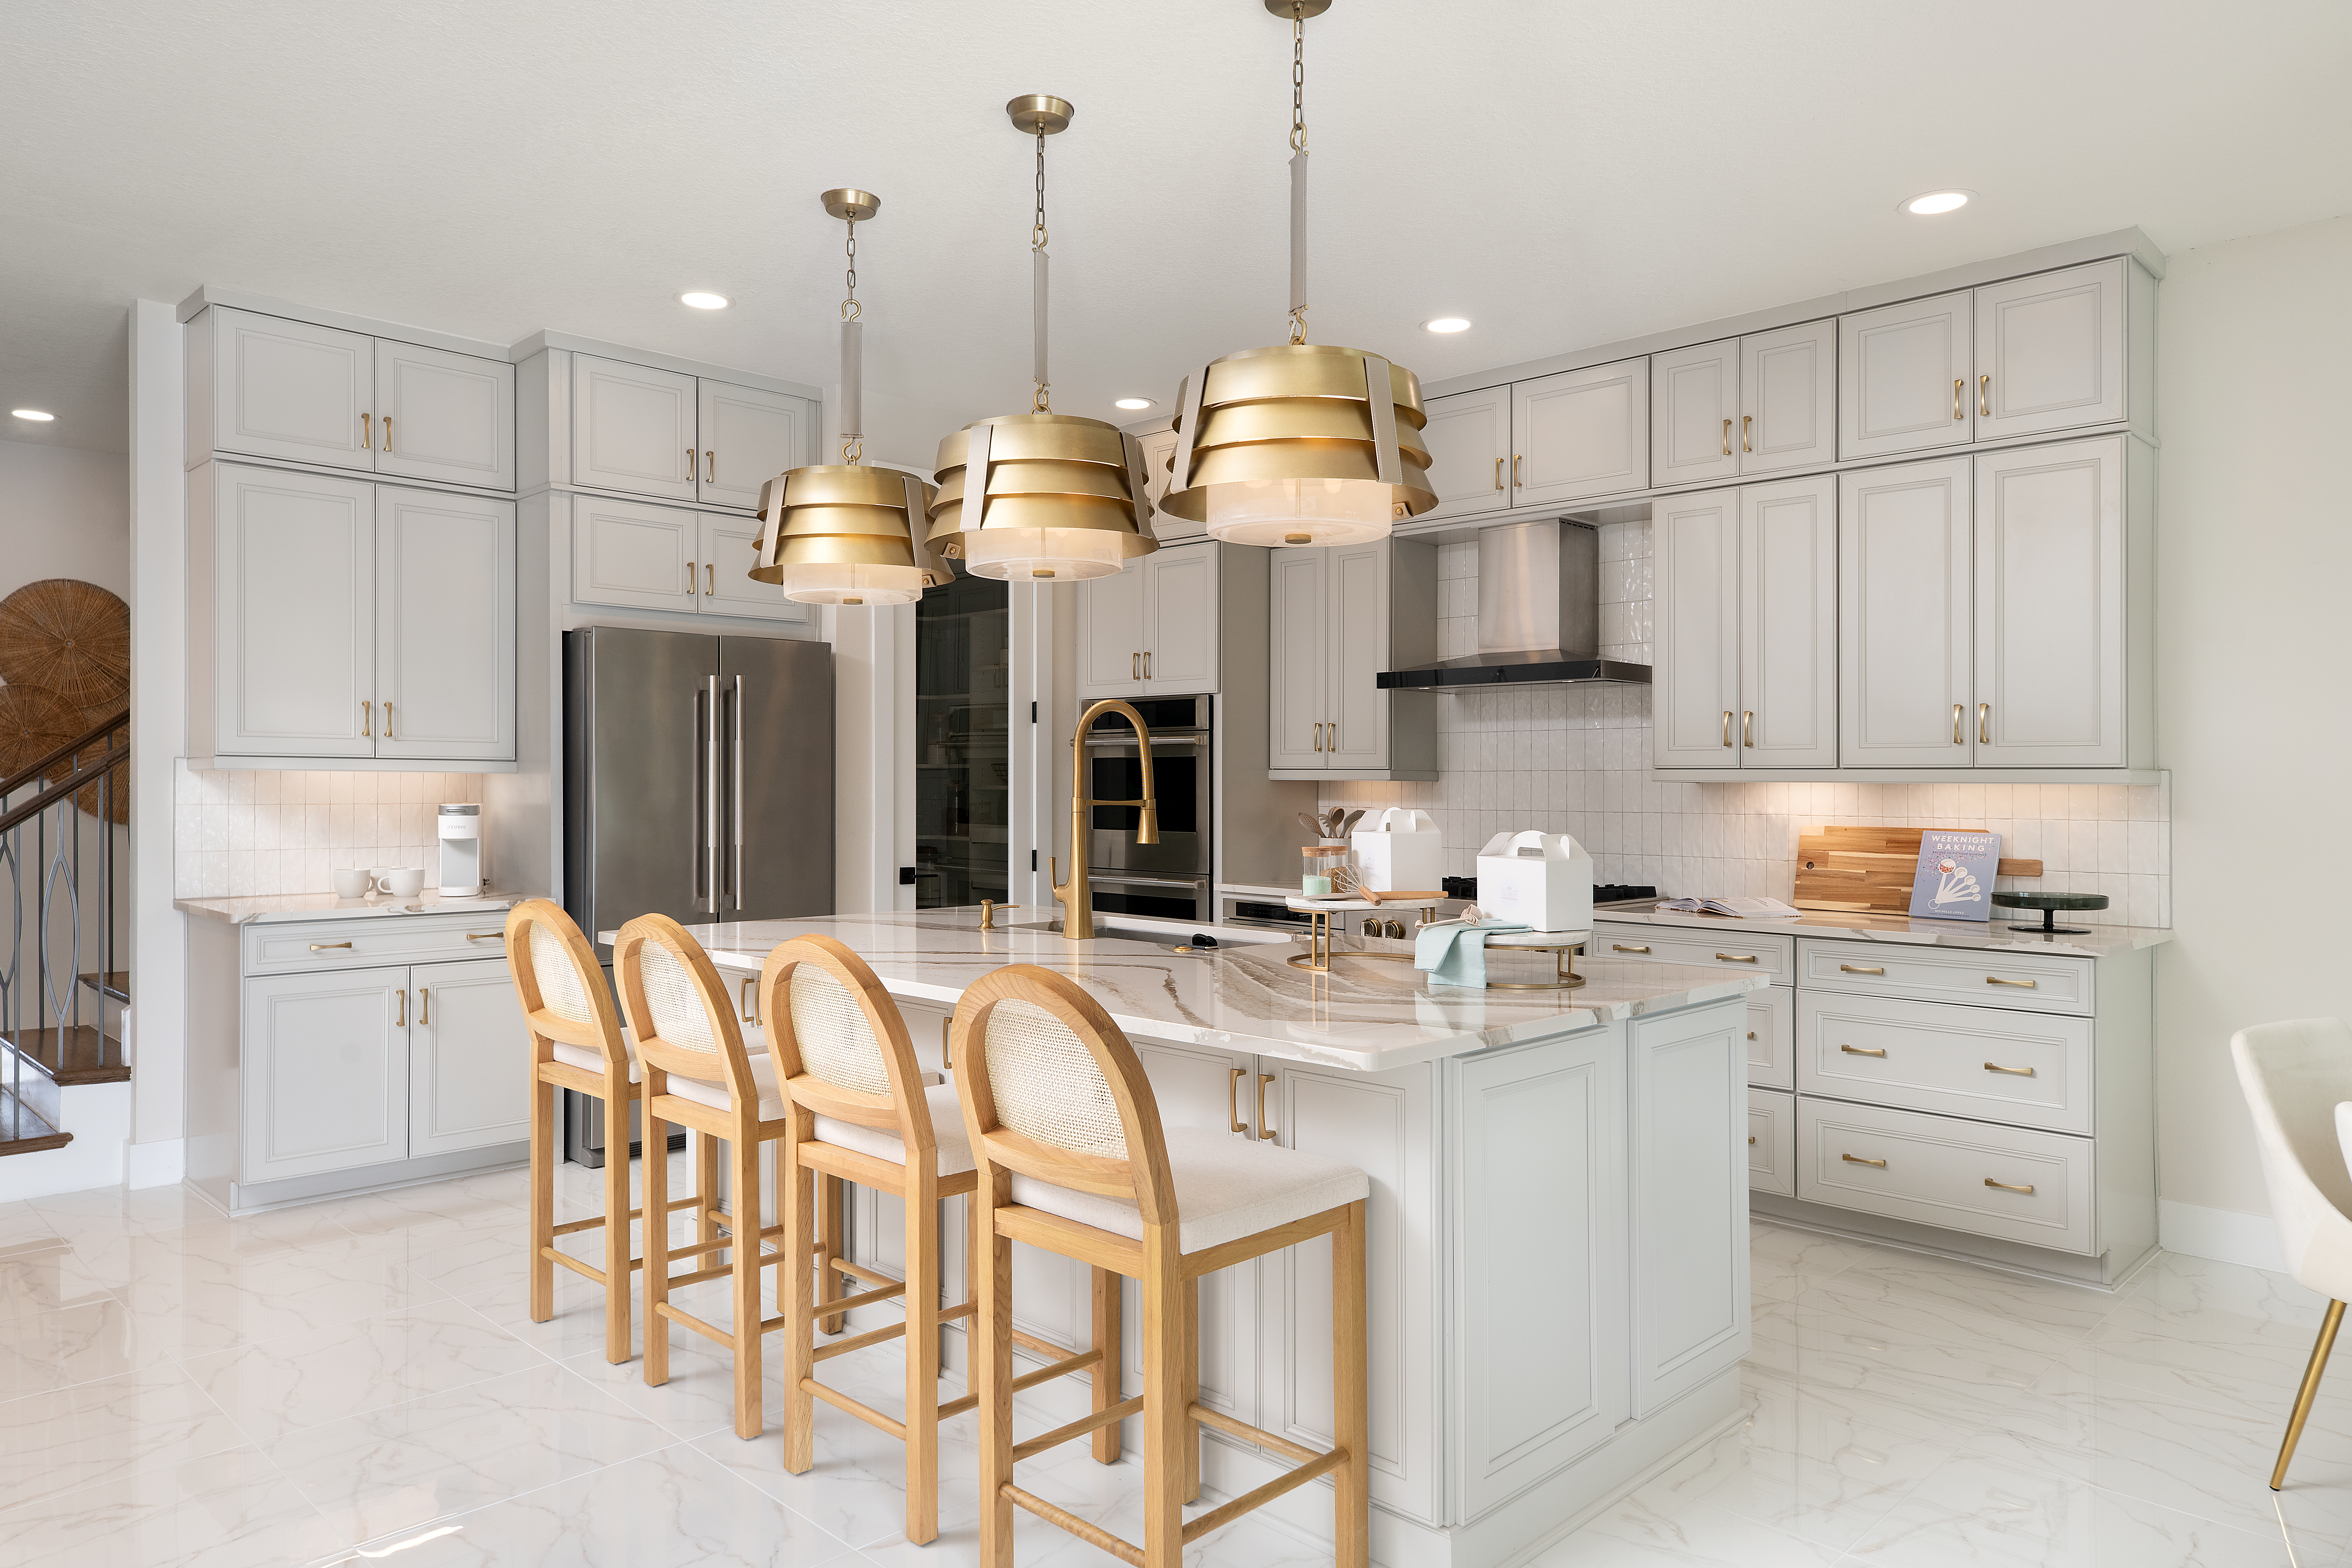 “With floor plans designed for today’s buyers and unrivaled personalization options offered on-site, Monterey at Lakewood Ranch will offer residents the best in luxury living in one of Sarasota County’s most desirable communities,”said Brian O’Hara, Division President of Toll Brothers in Tampa/Sarasota.